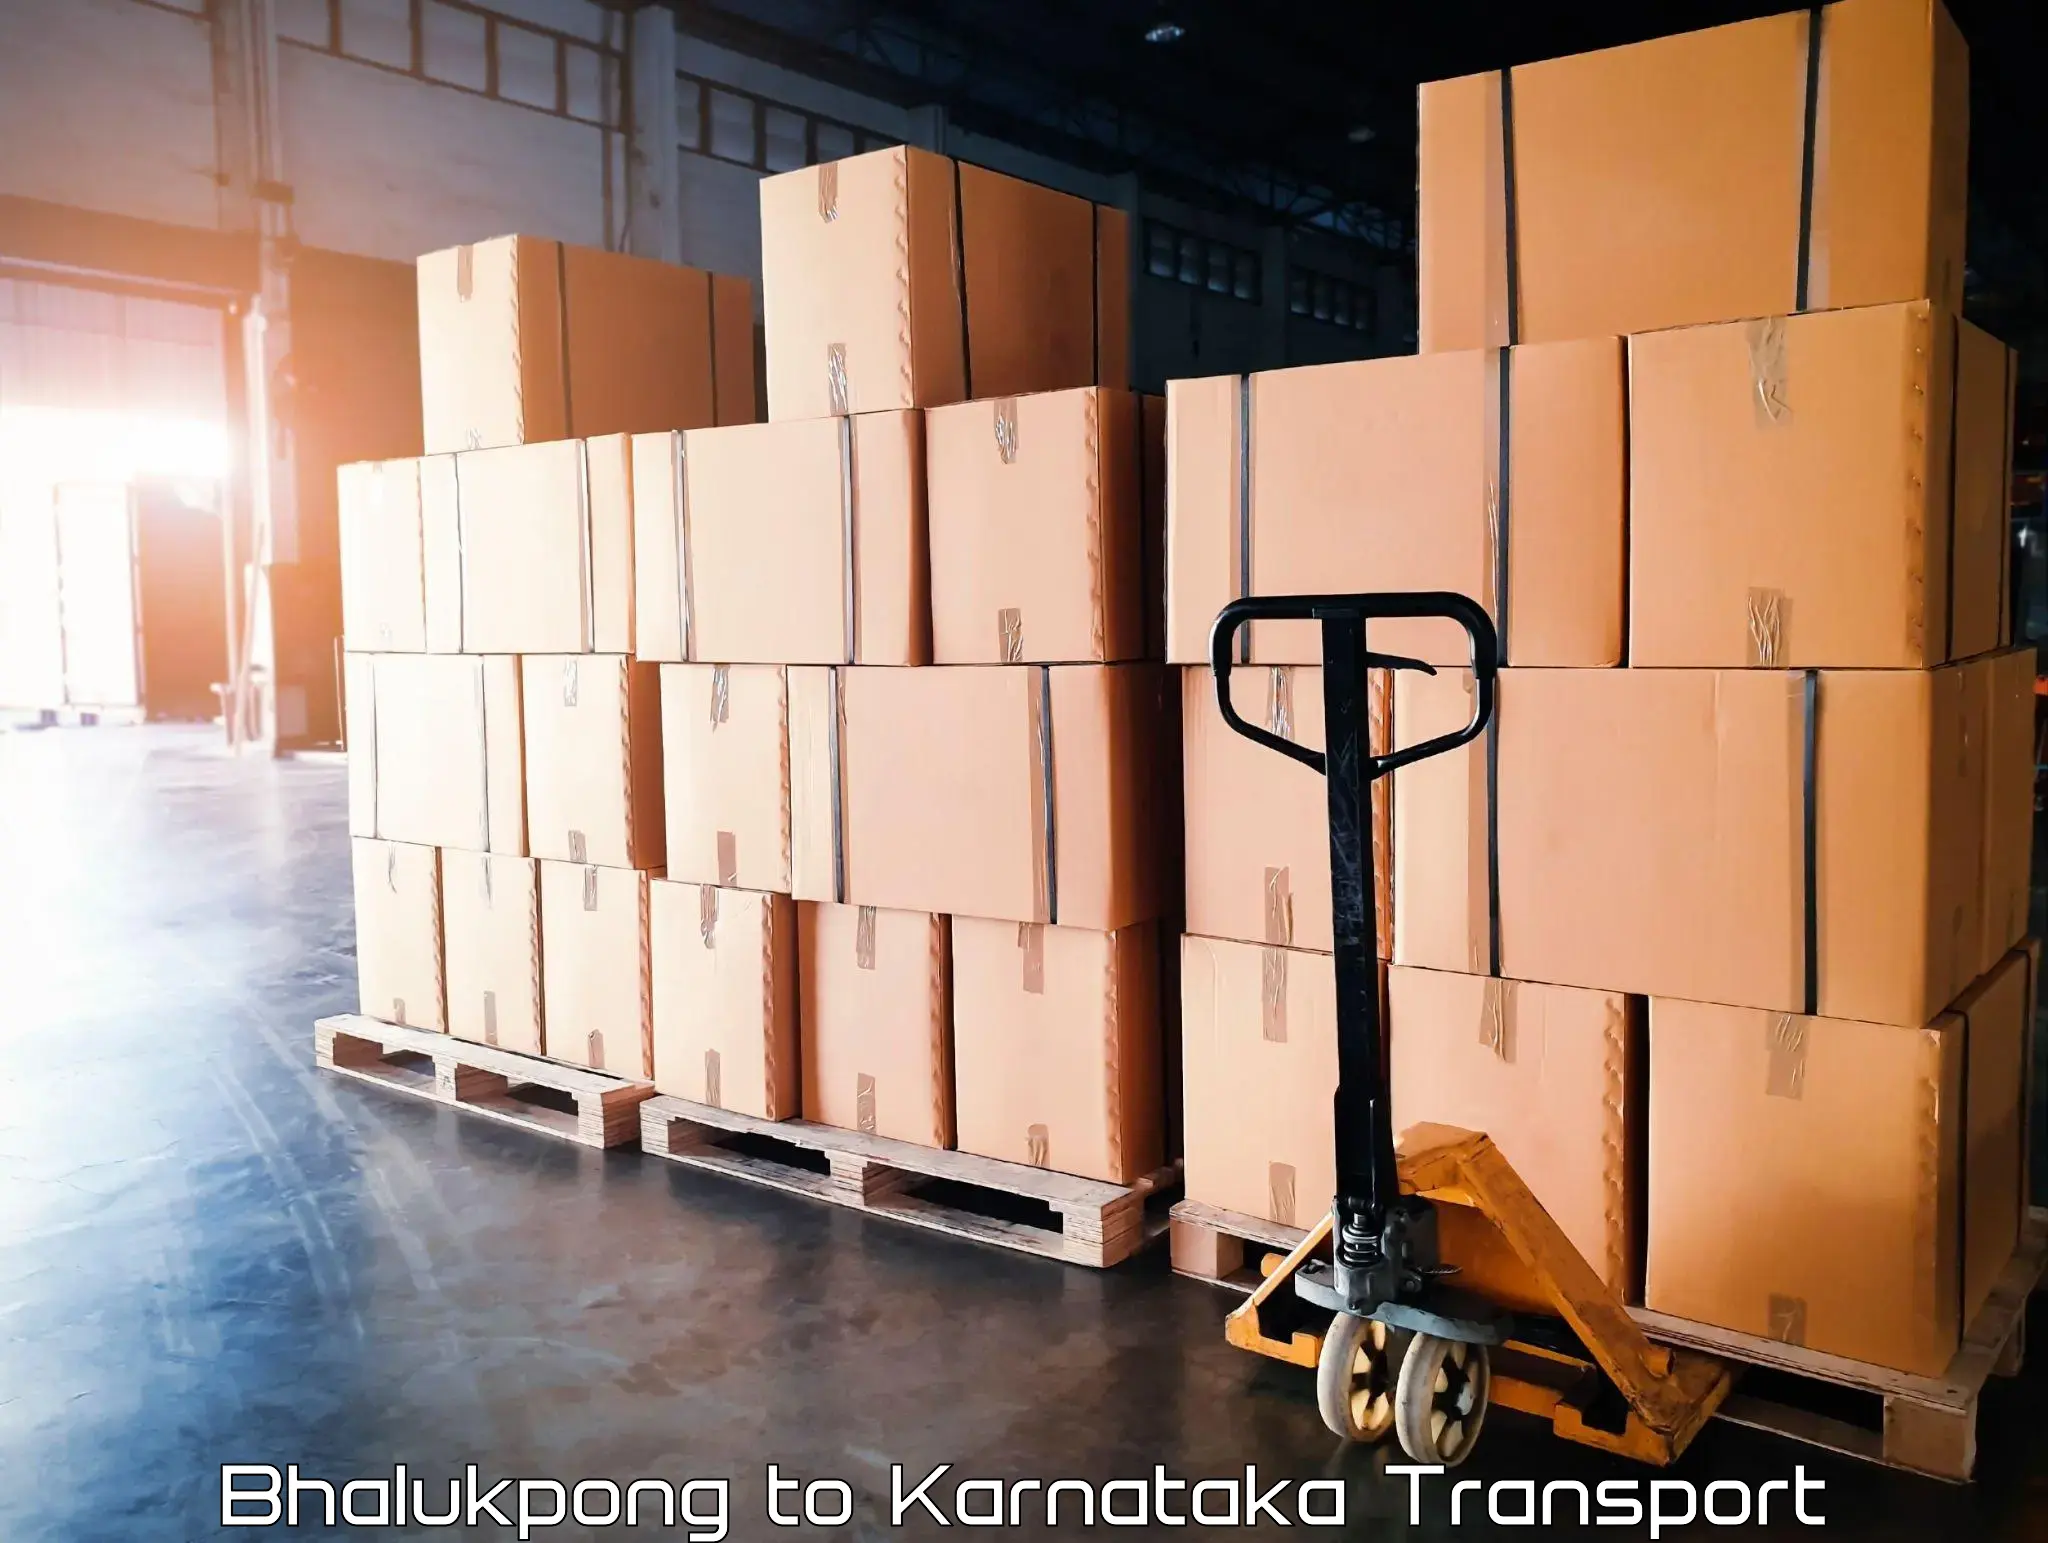 Transport bike from one state to another Bhalukpong to Karnataka